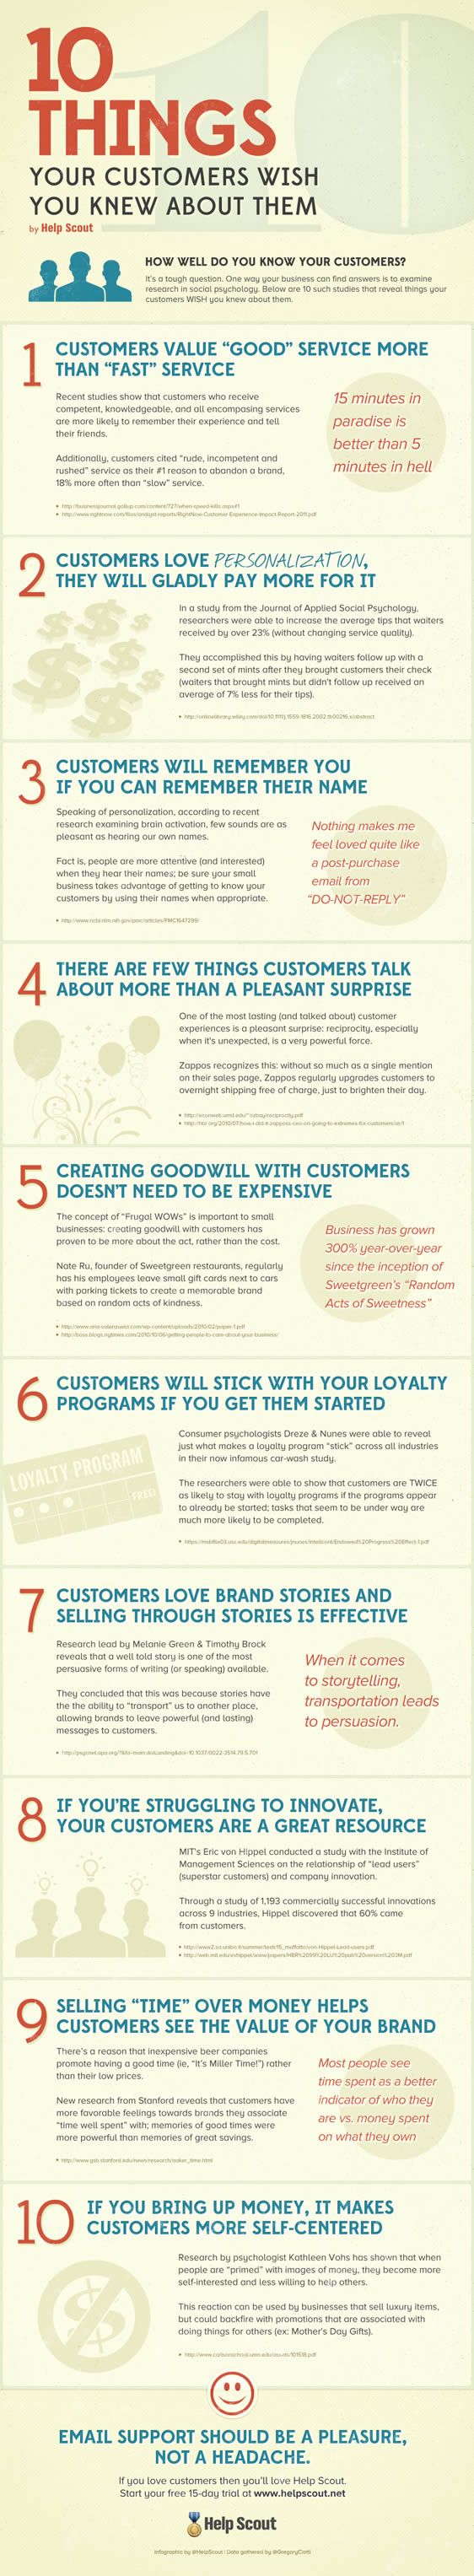 10 things your customers wish you knew about them infographic statistics